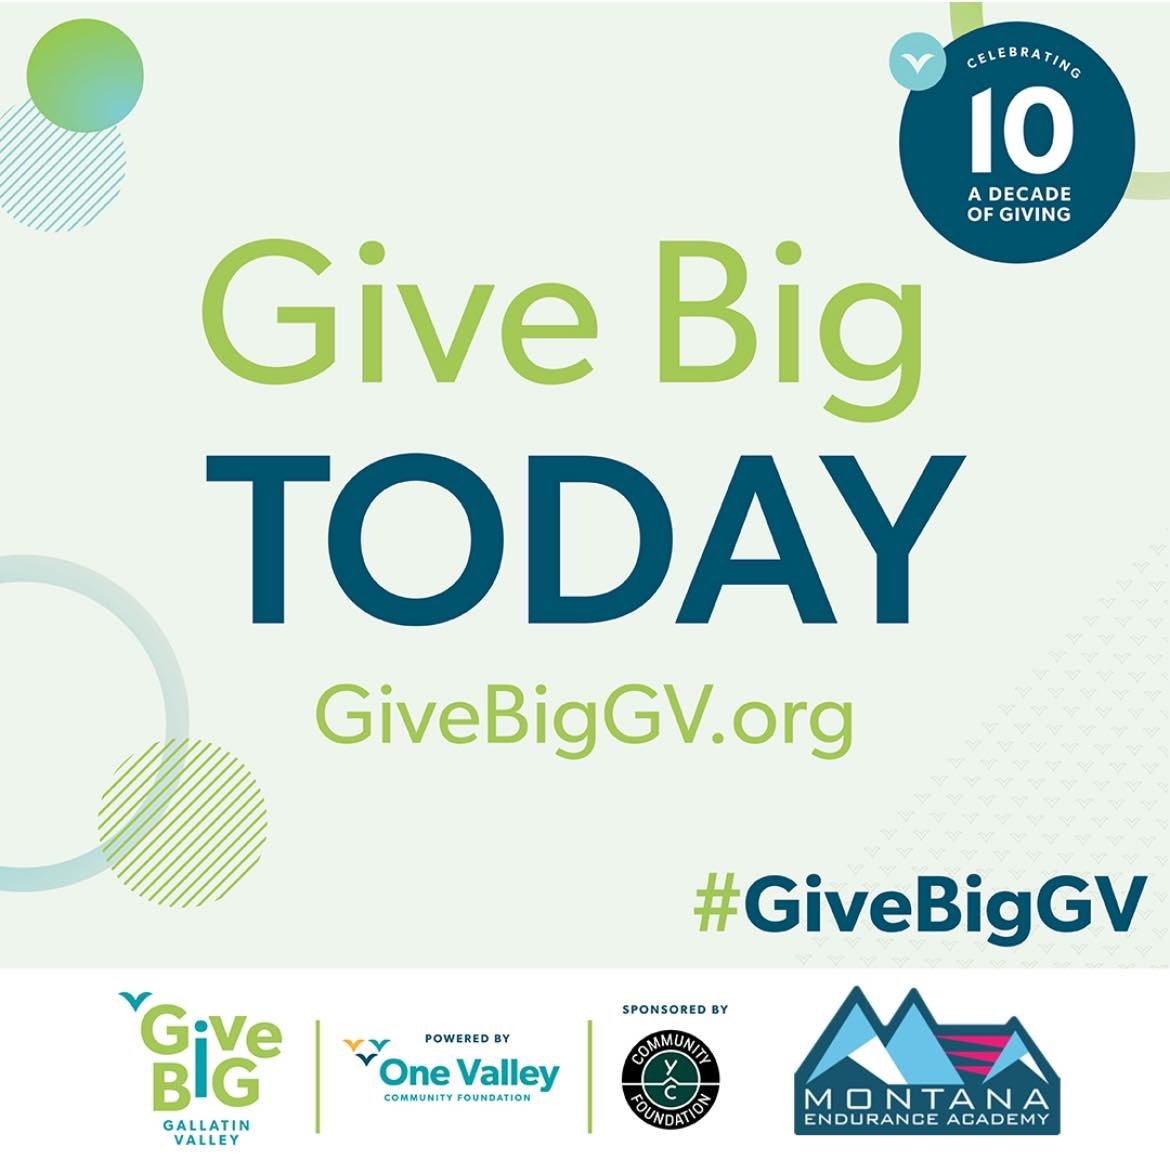 A few hours left to visit givebiggv.org today and donate to your favorite non-profit organization. @mtenduranceacademy is dedicated to providing quality programs for all ages and abilities and work hard to keep our costs affordable.

https://www.give